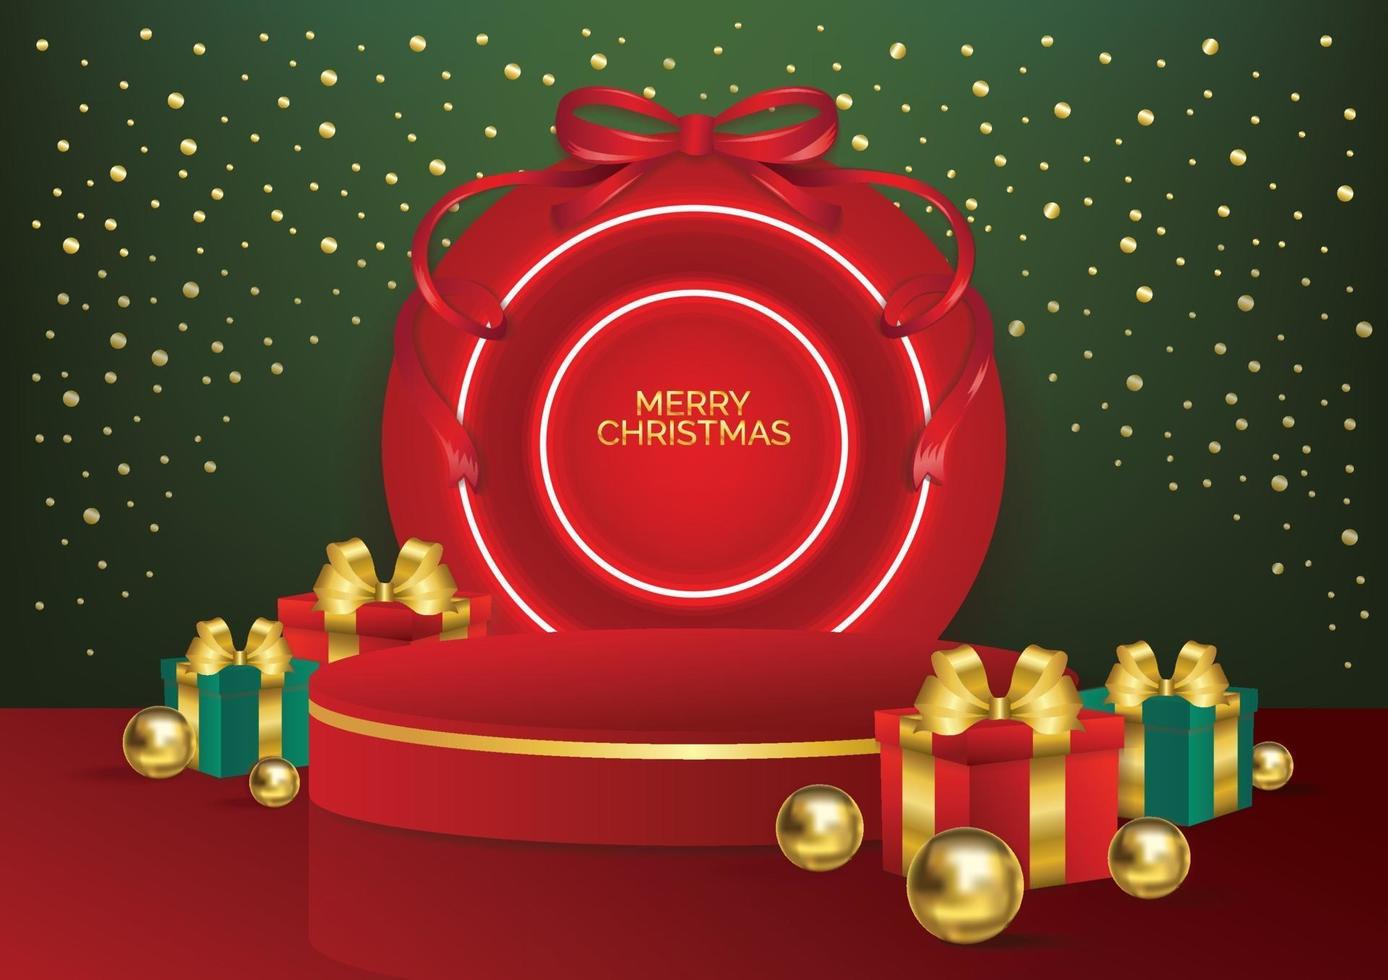 Christmas podium red neon background vector